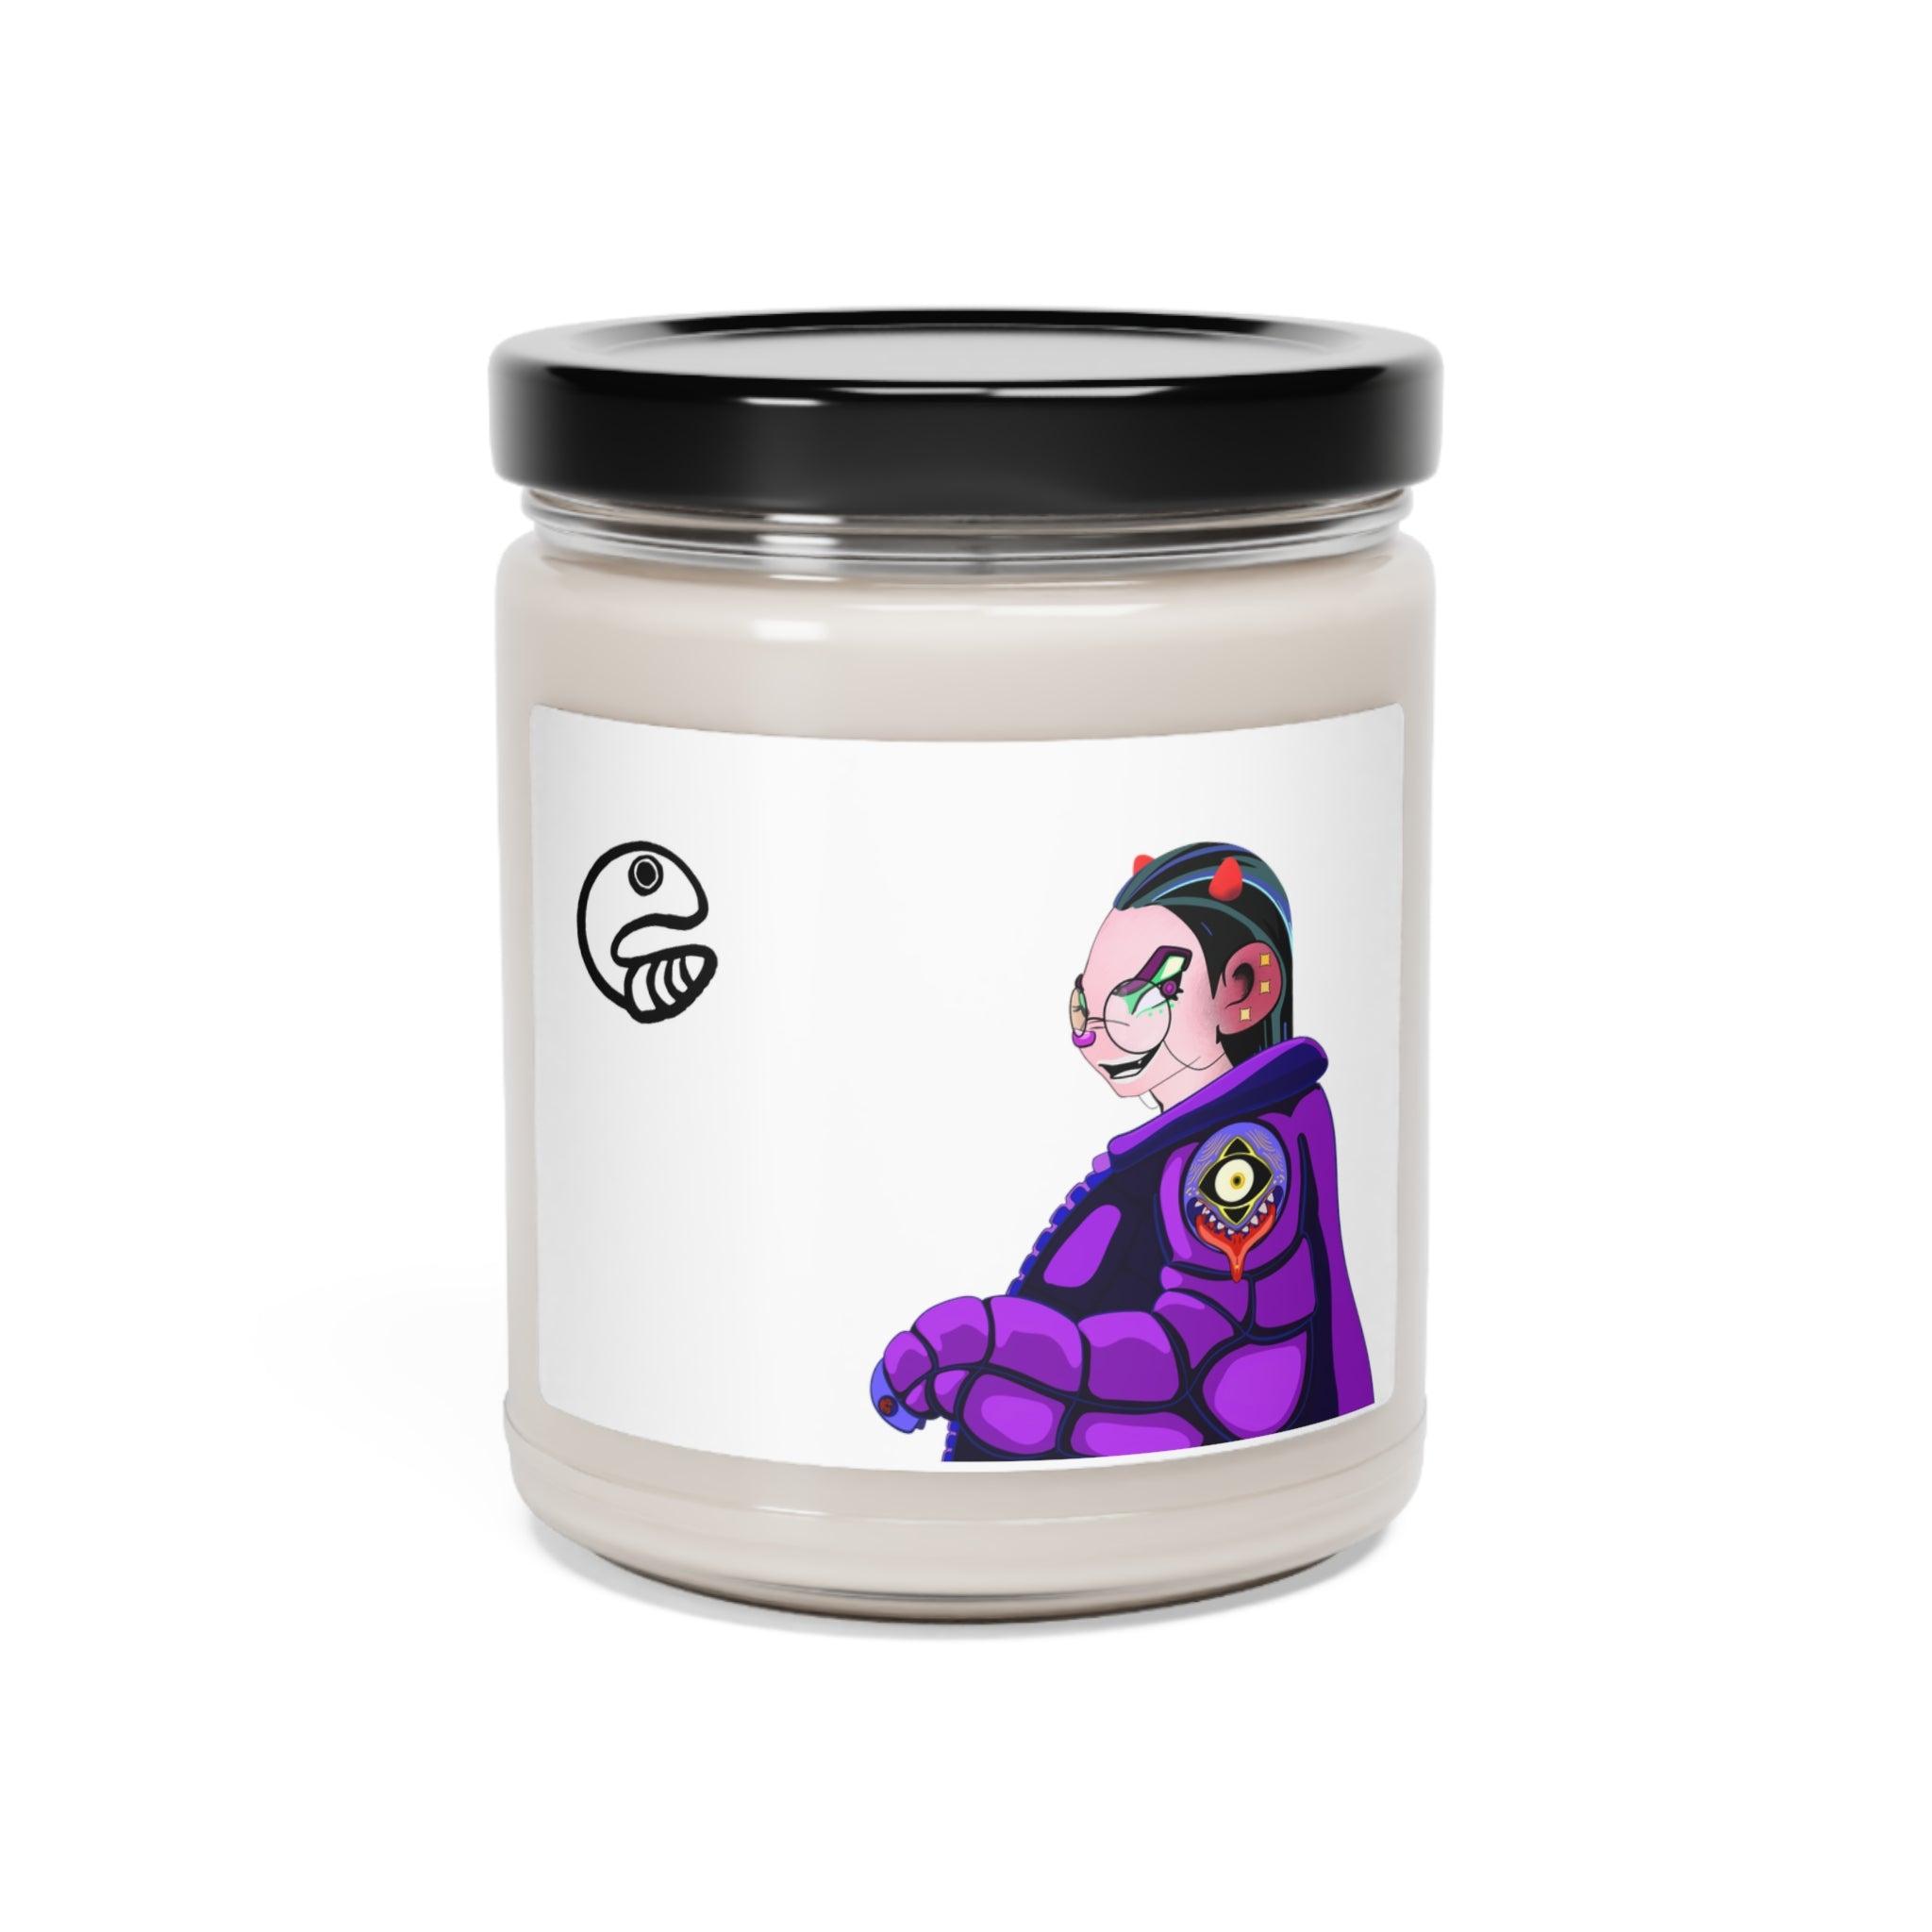 Female Tribe Scented Soy Candle, 9oz